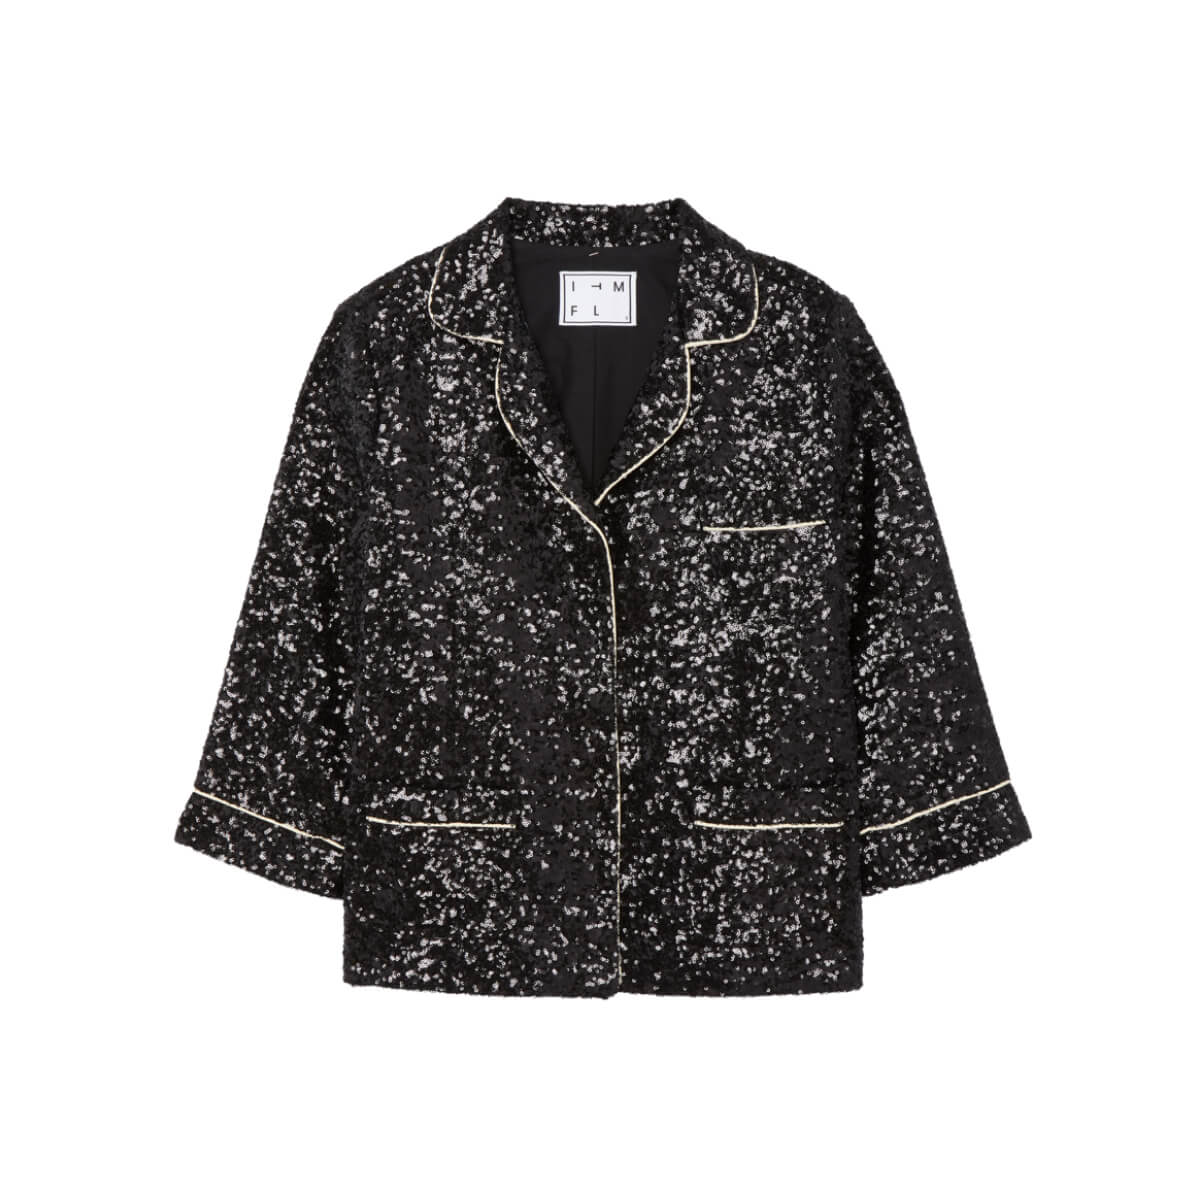 In The Mood For Love jacket